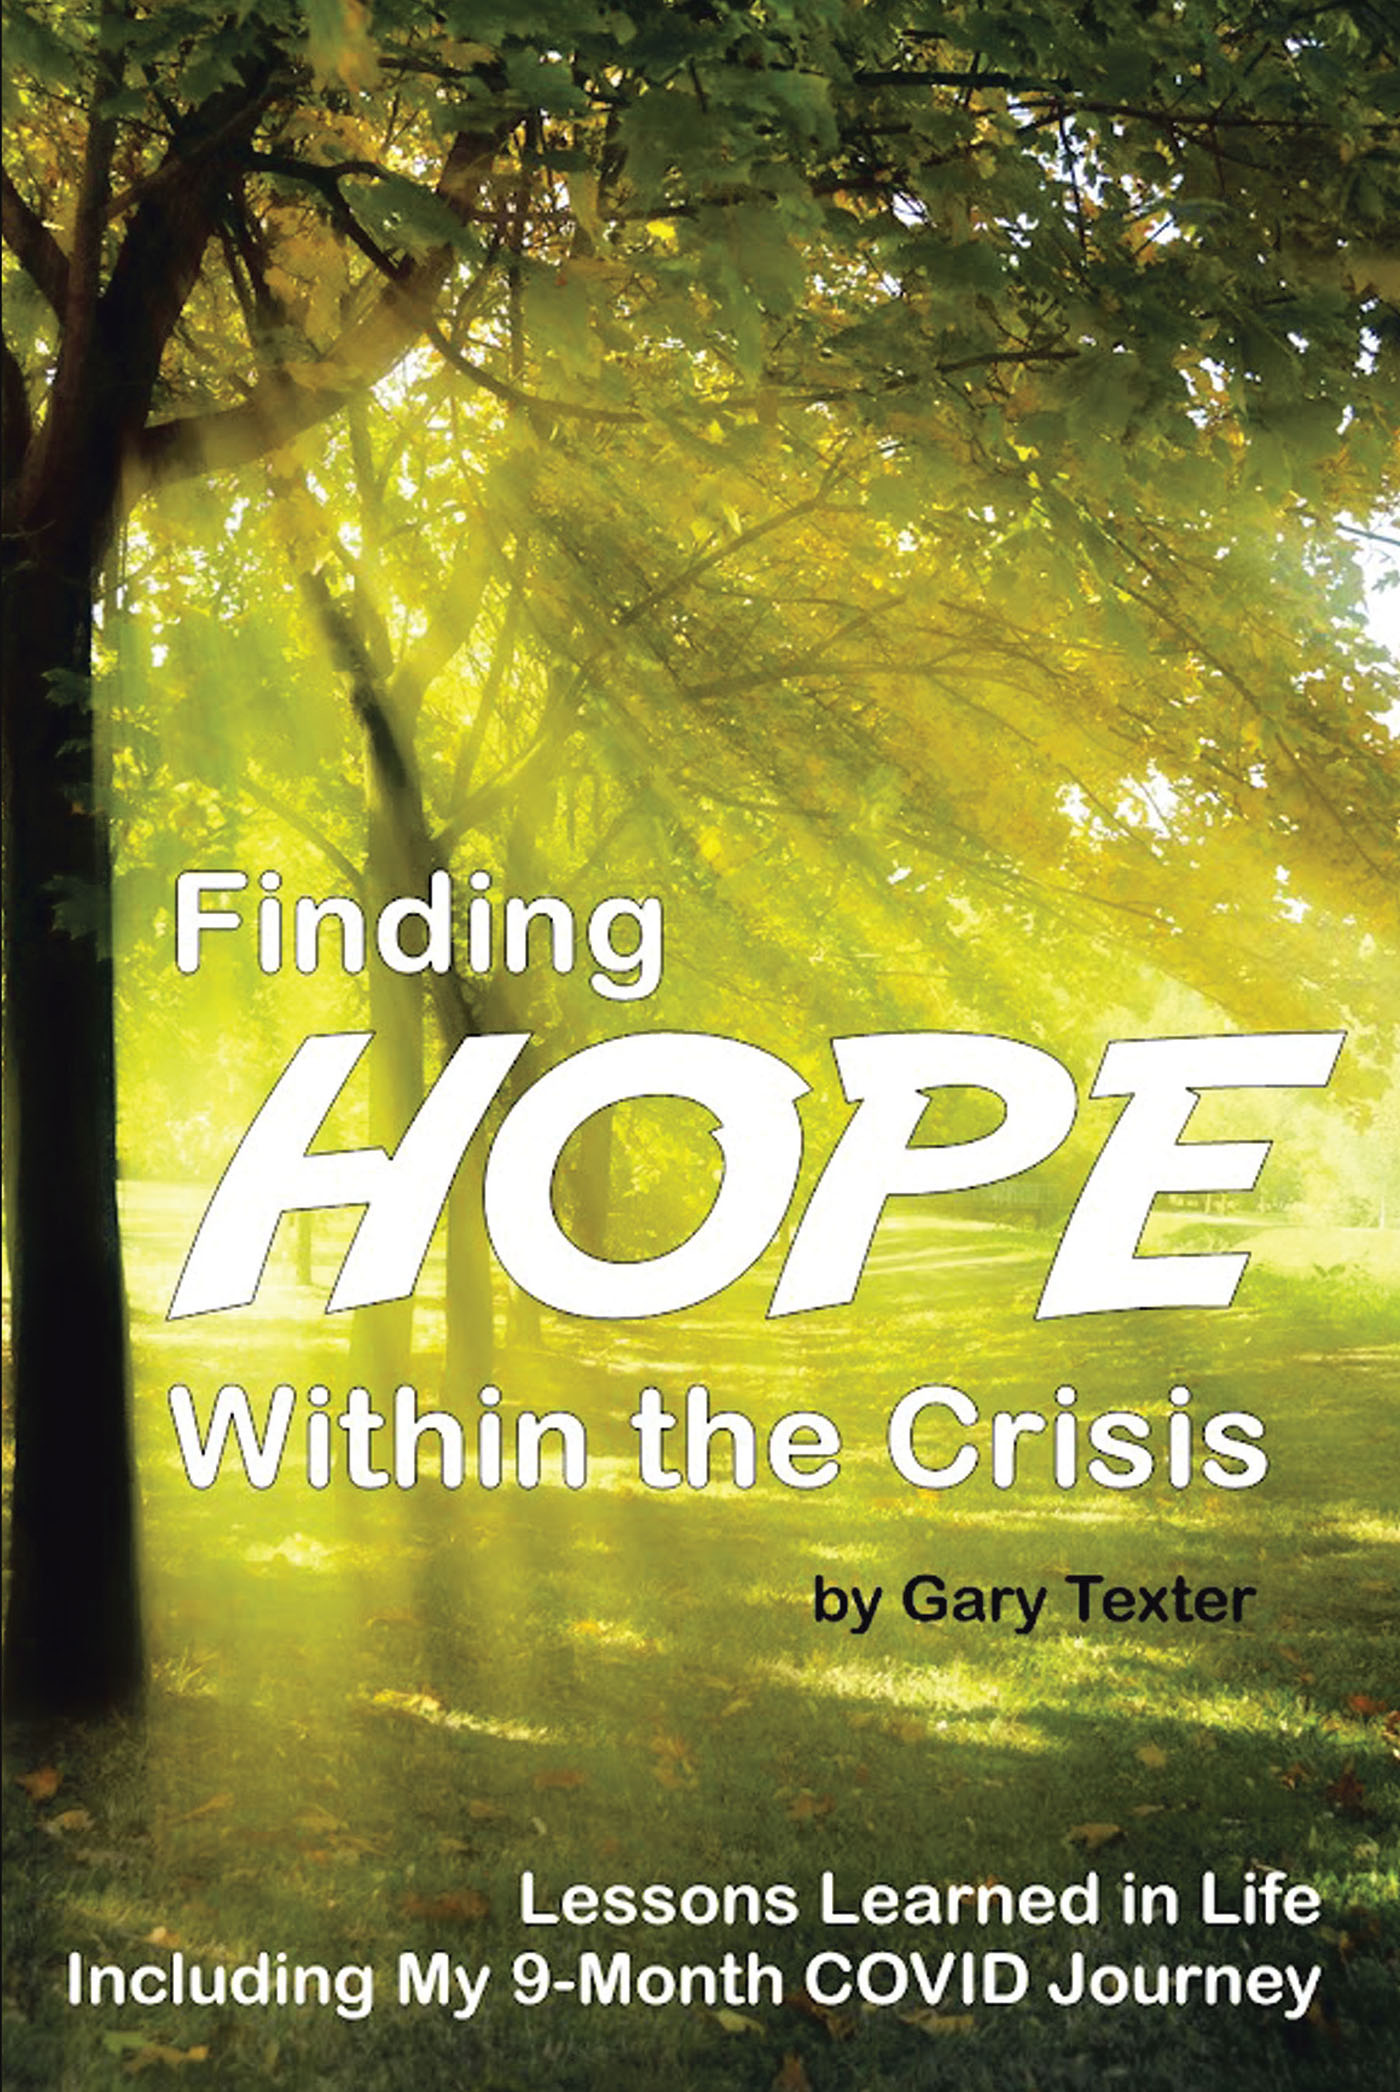 Gary Texter’s Newly Released “Finding Hope Within the Crisis: Lessons Learned in Life Including My 9-Month COVID Journey” is a Moving Personal Memoir